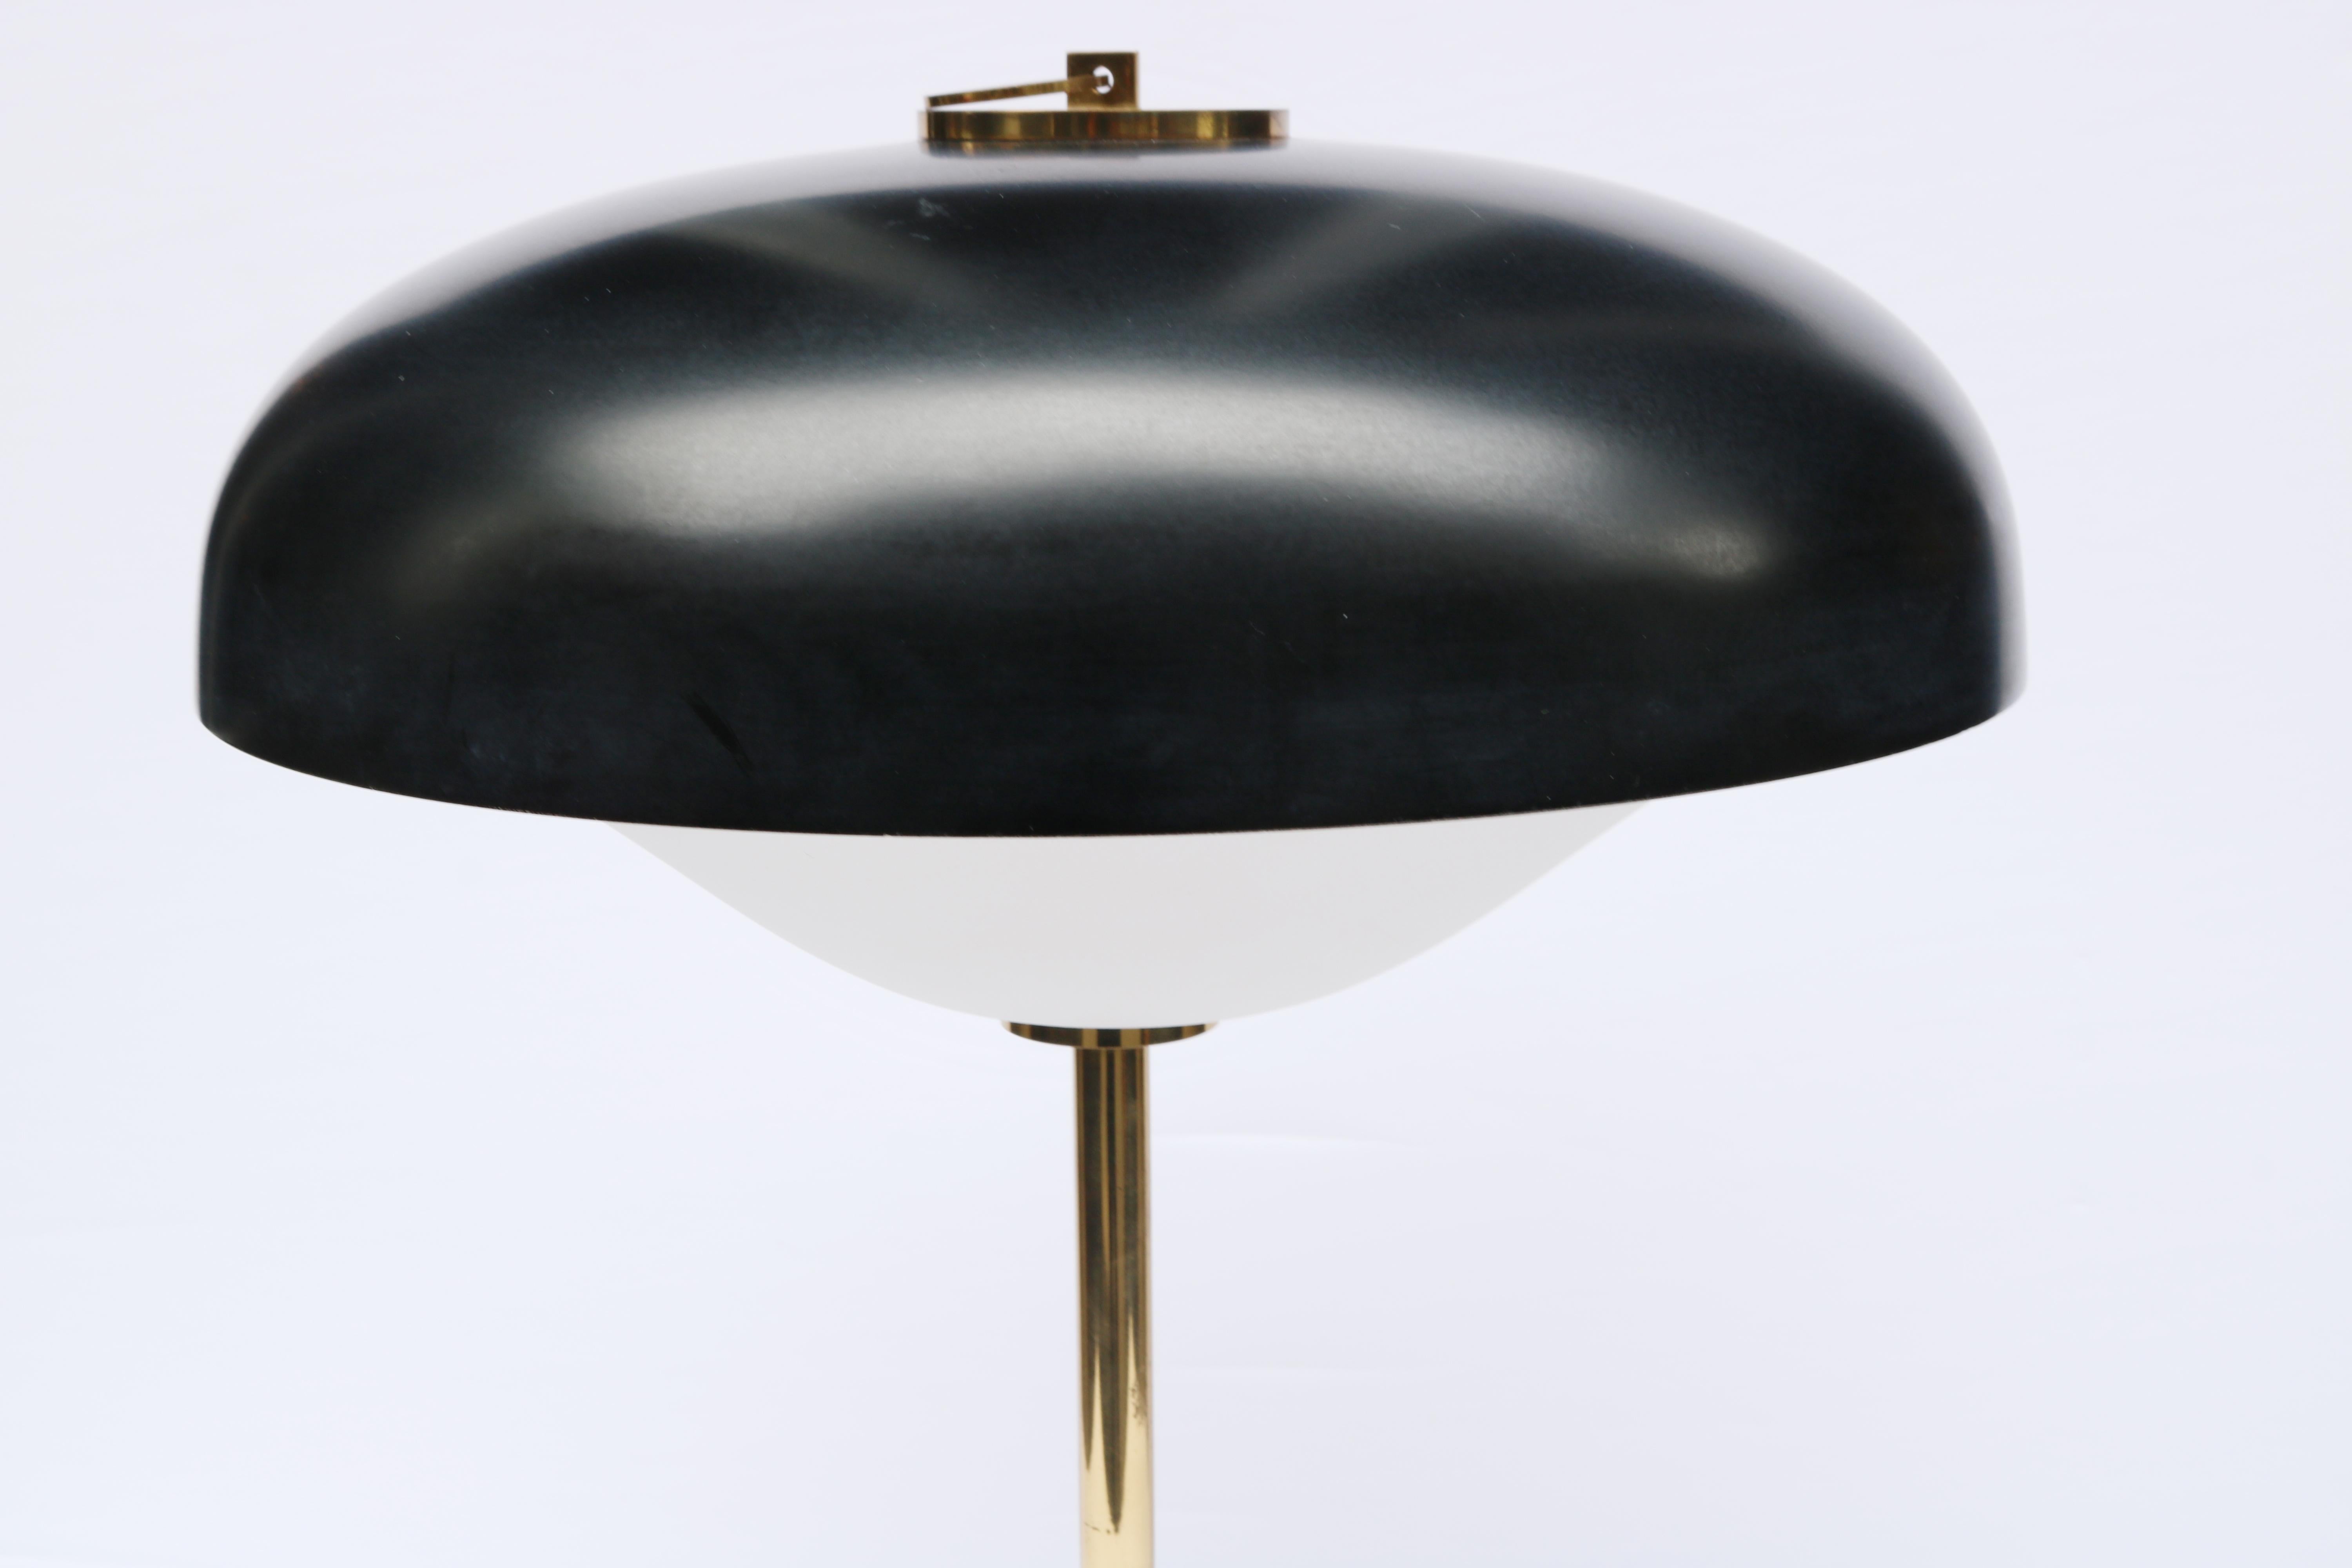 Enameled Table lamp mod. 12827s by Gregotti, Meneghetti and Stoppino, Italy, circa 1960 For Sale